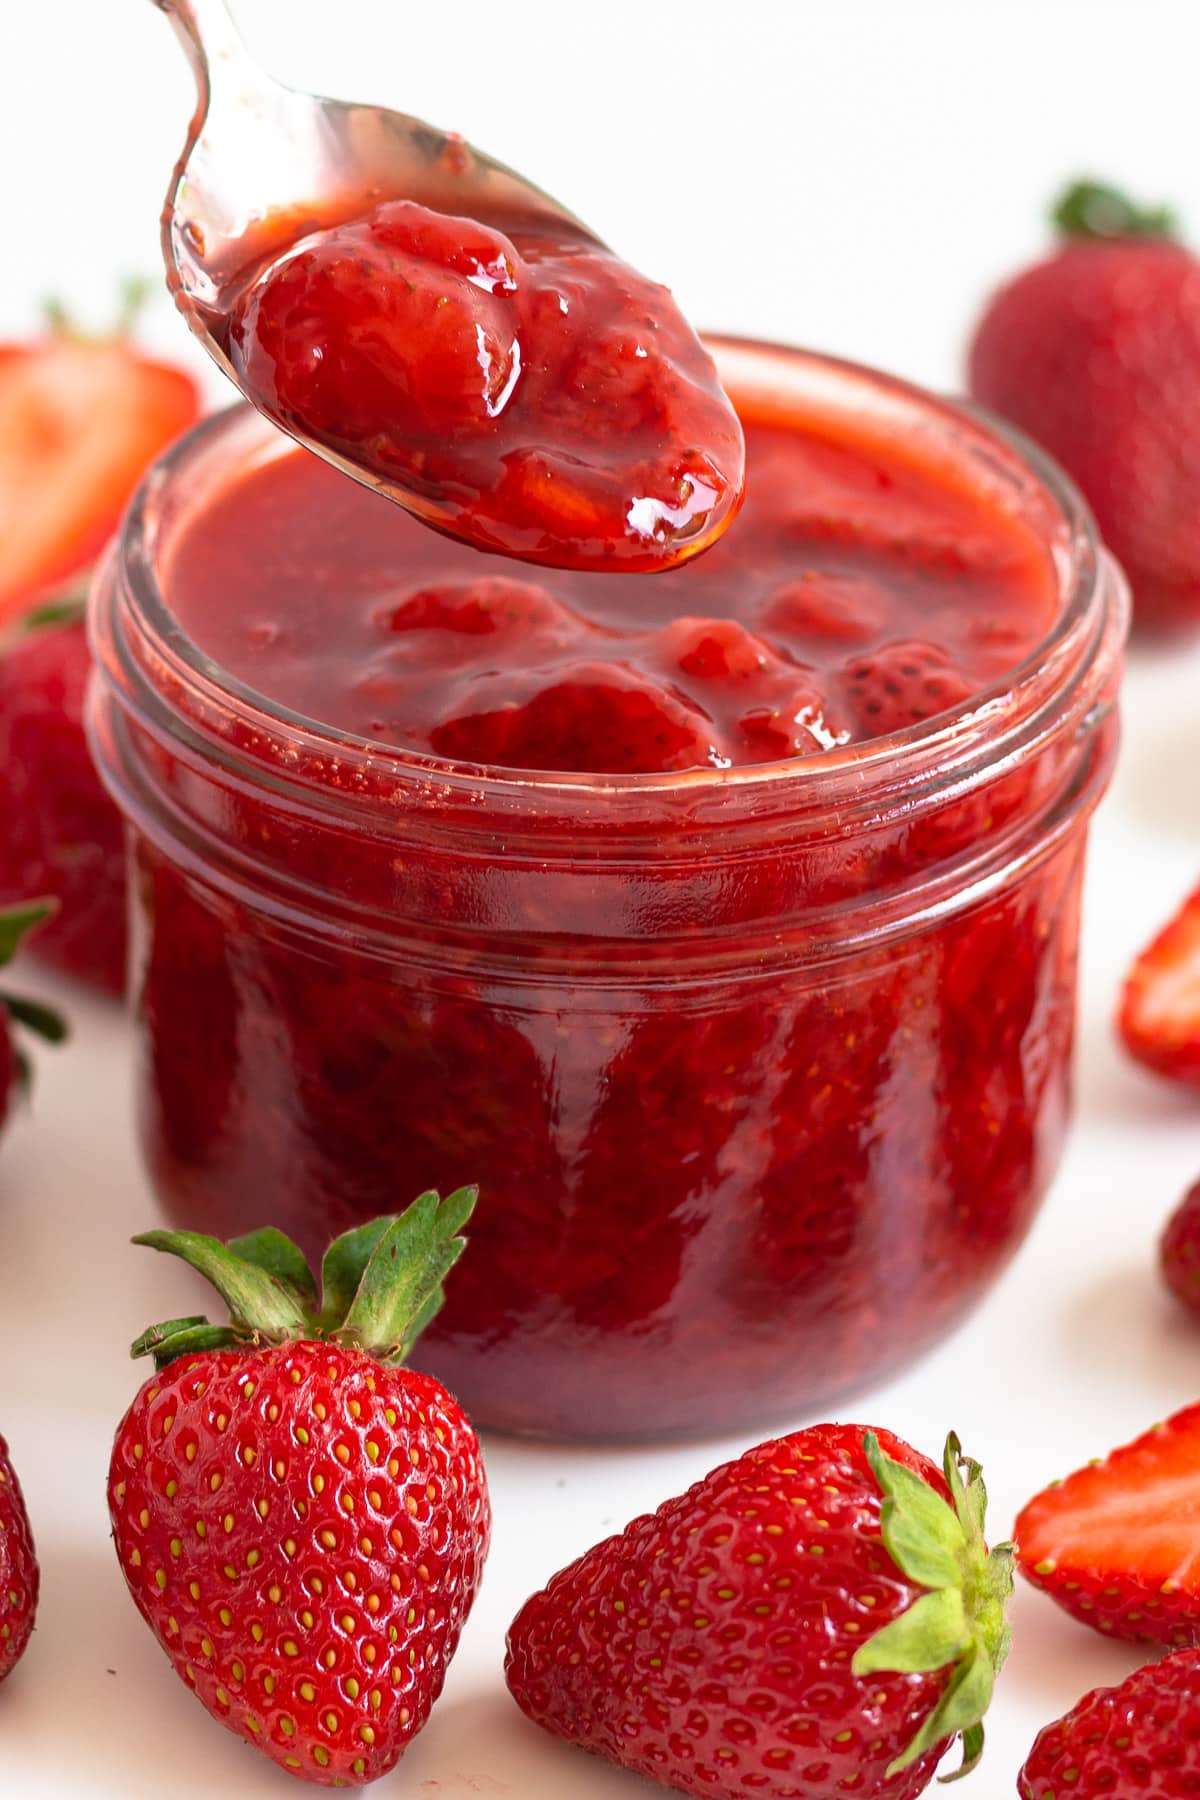 Jar of strawberry compote surrounded by fresh strawberries and spoon scooping some out.